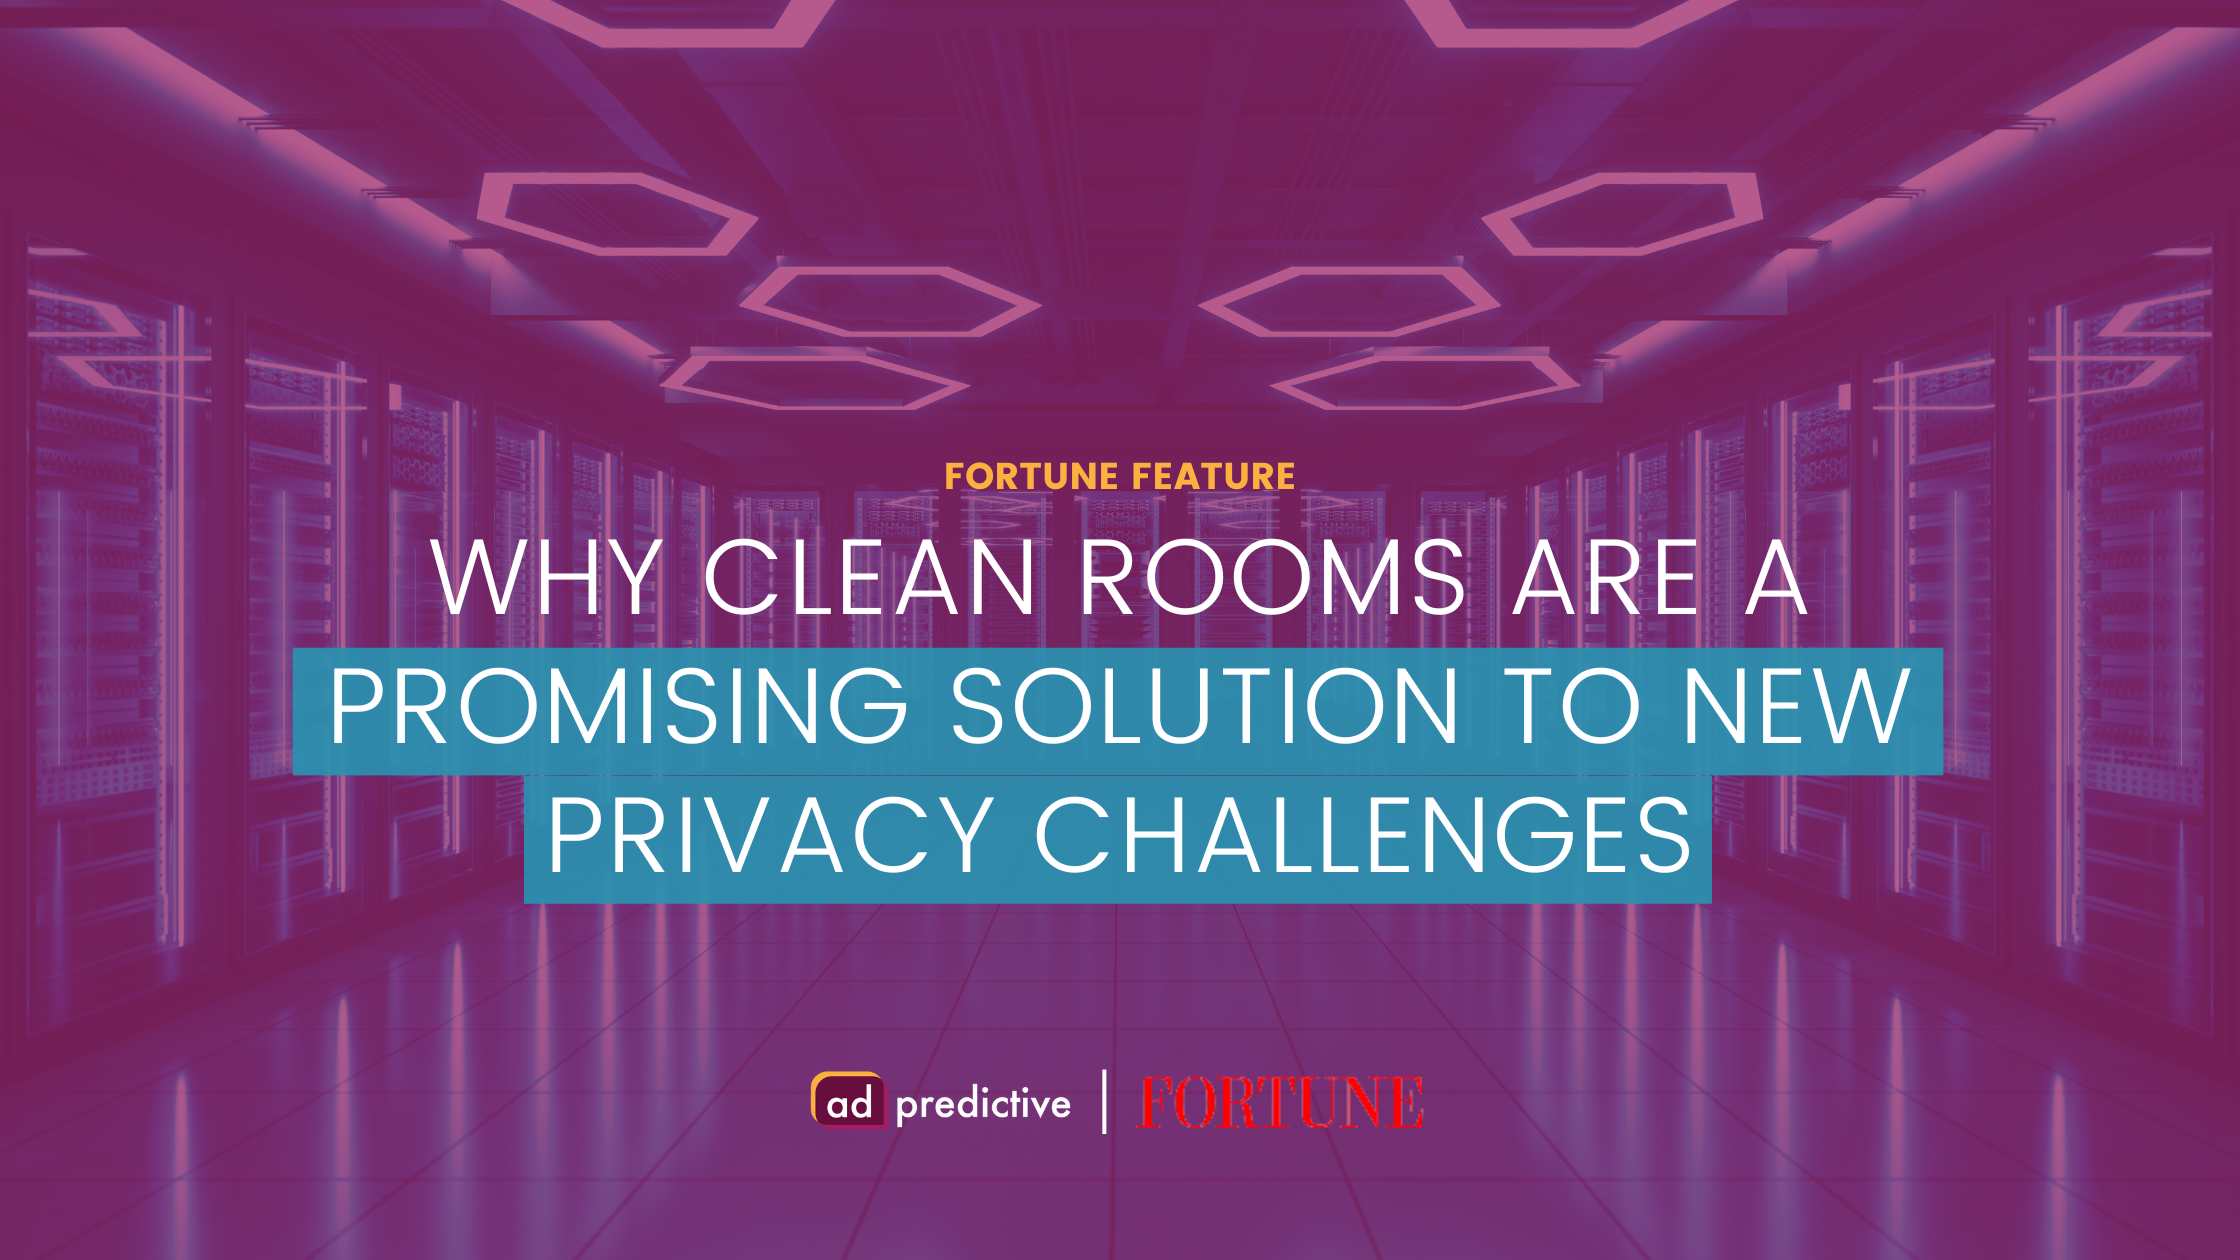 Featured image for “The Way Companies Are Handling Consumer Data is Changing. Here’s Why Clean Rooms Are A Promising Solution To New Privacy Challenges”